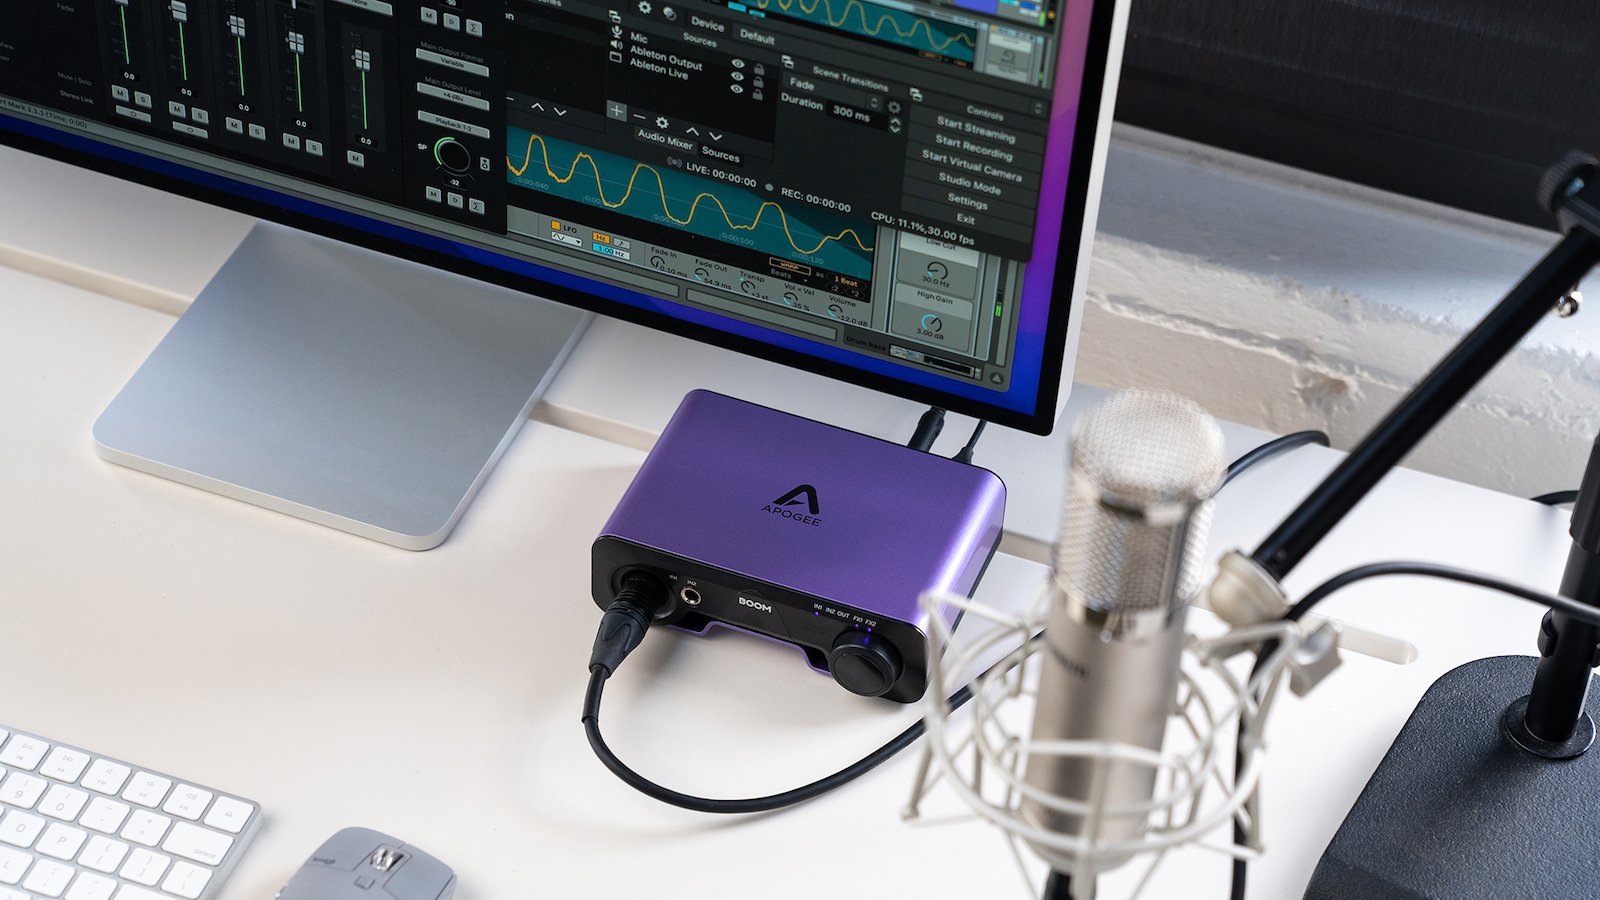 Apogee BOOM – 2 IN x 2 OUT USB Audio Interface beautifully tone-shapes your recordings